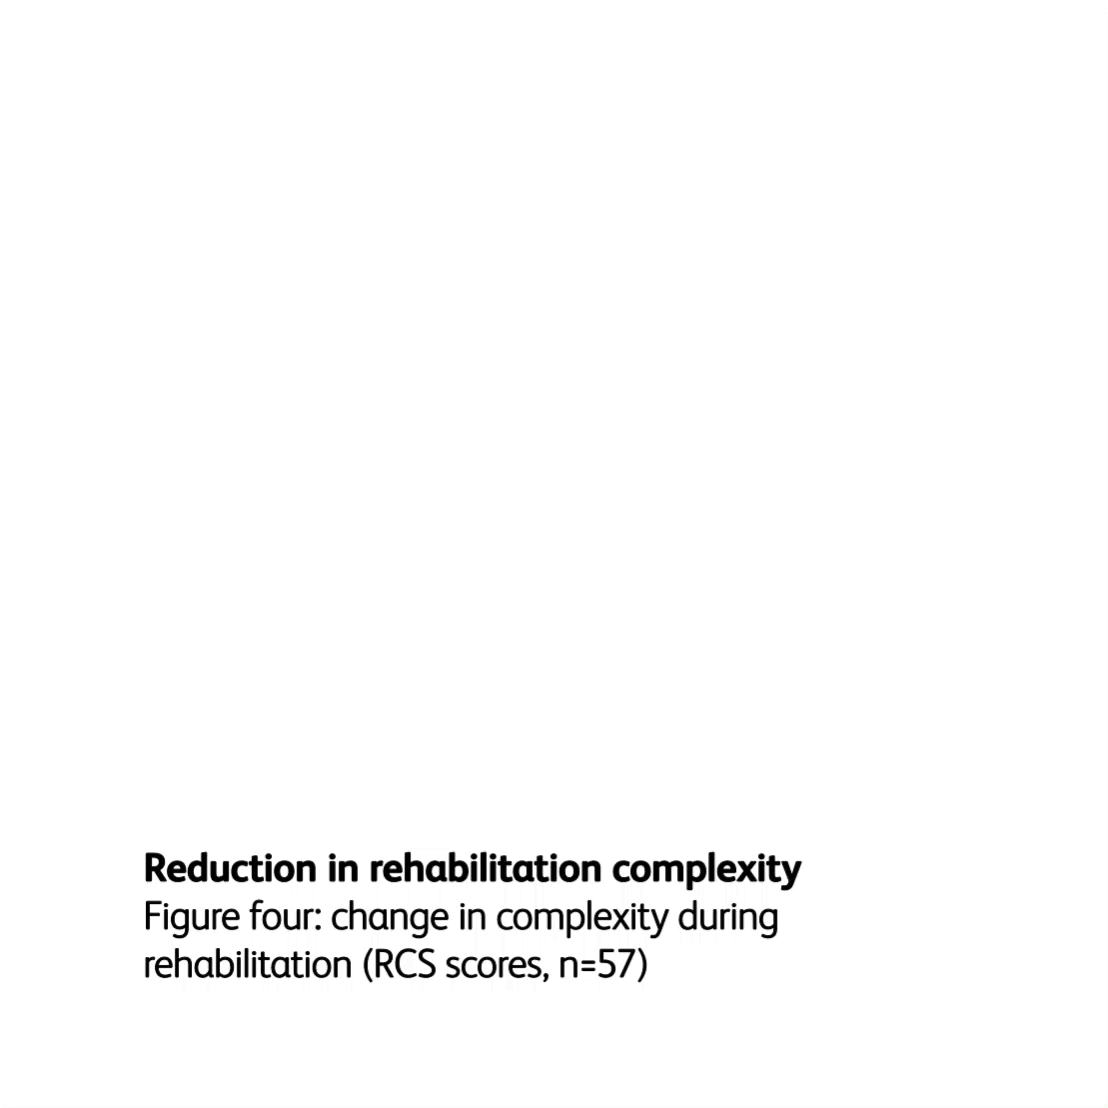 Figure four: change in complexity during rehabilitation (RCS scores, n=57)